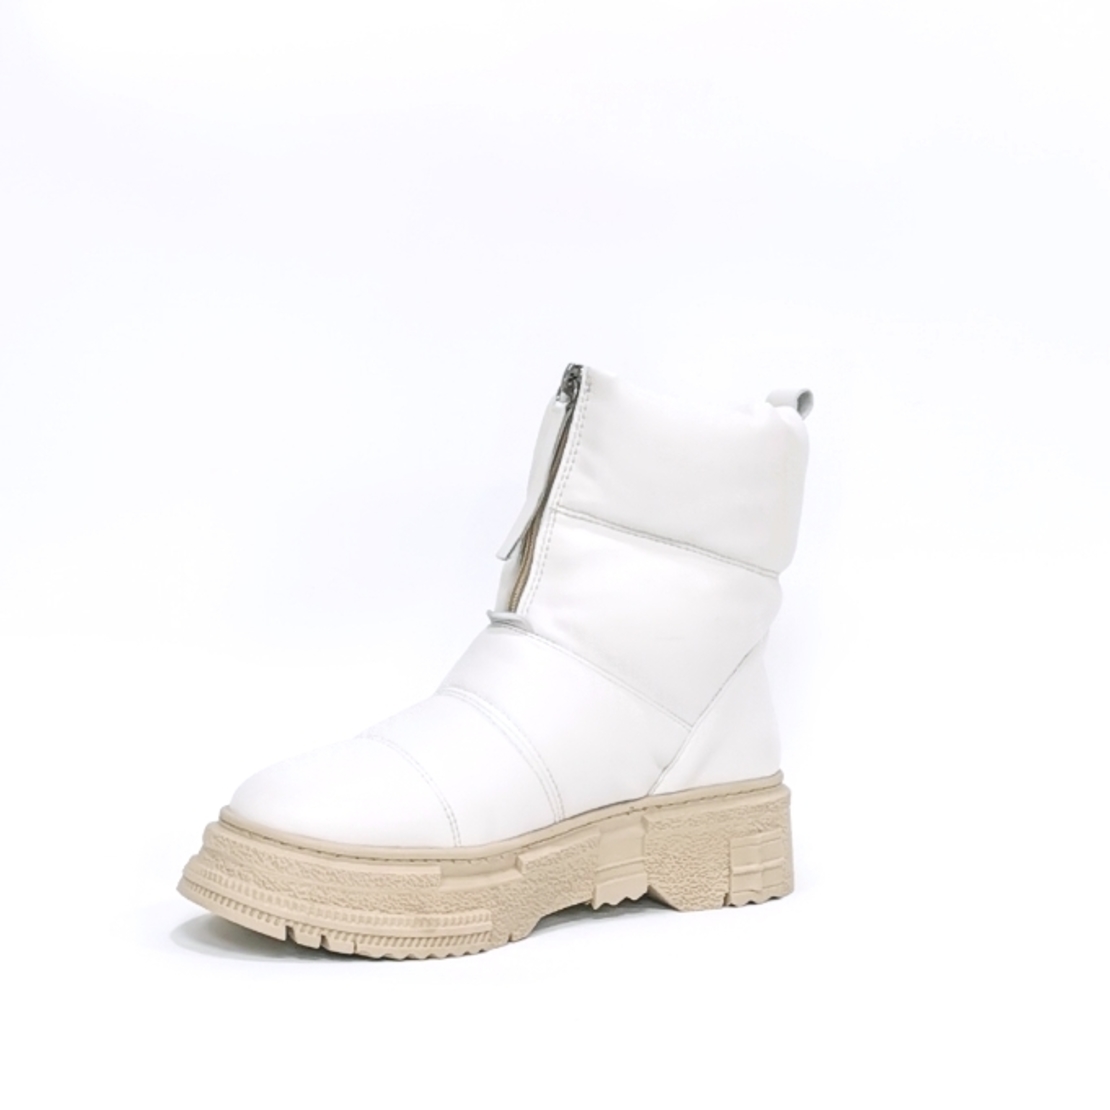 Women's casual boots made of natural leather in beige color/740